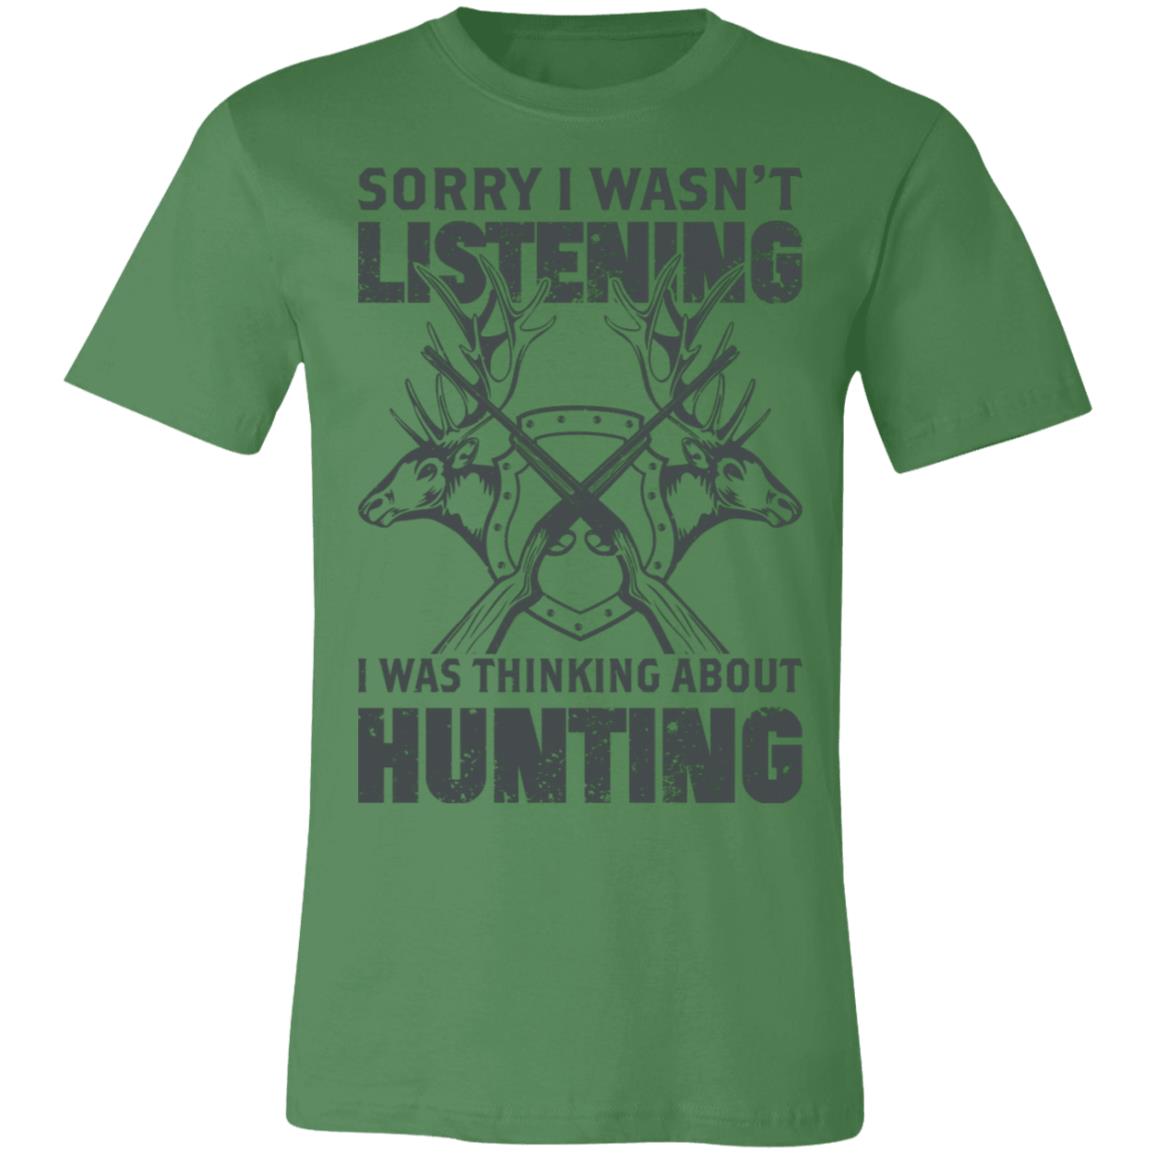 Wasn't Listening Hunting Hunter Gift T-Shirt-Express Your Love Gifts